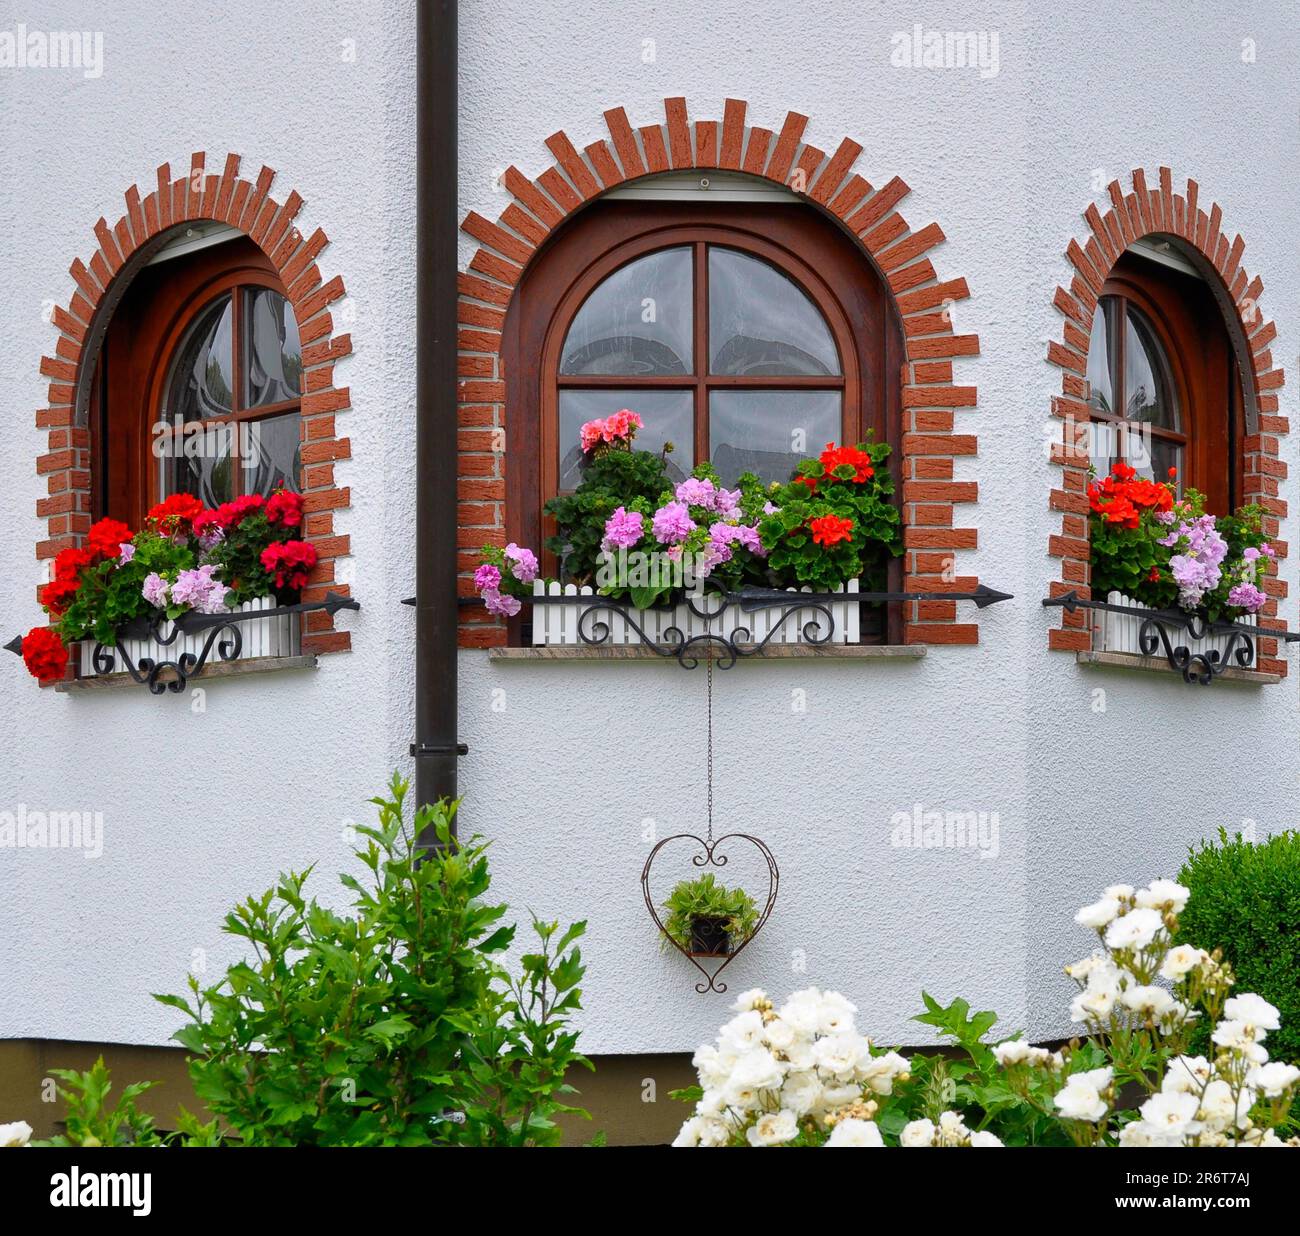 Garden with house, arched window with flowers, geraniums at the window outside, white roses in the garden Stock Photo